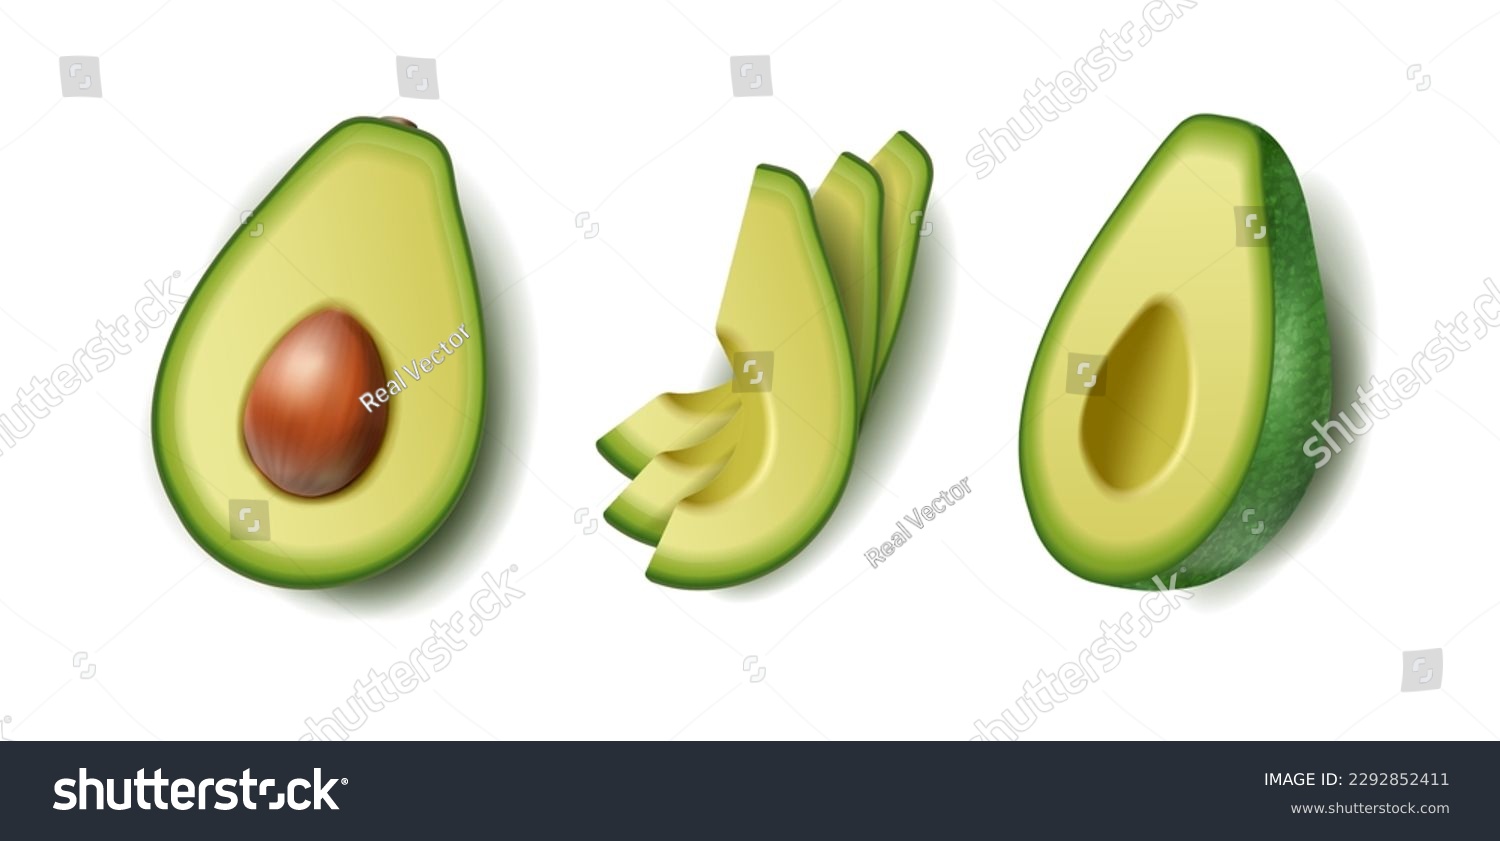 3d realistic vector icon set. Avocado set in half sliced. Isolated on white background. #2292852411